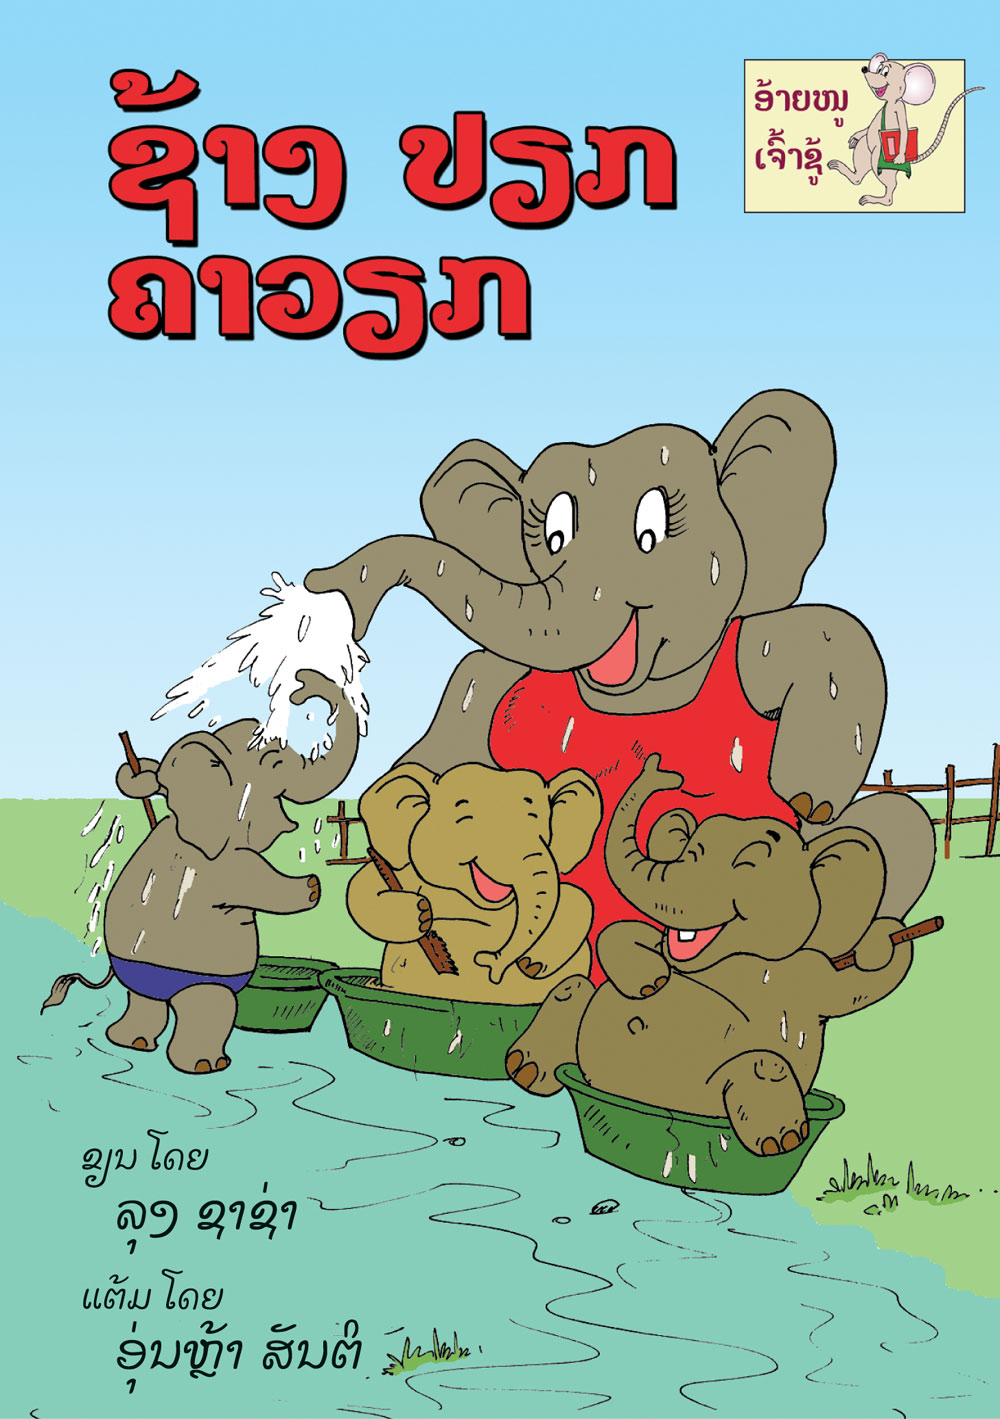 The Wet Elephant is Busy large book cover, published in Lao language